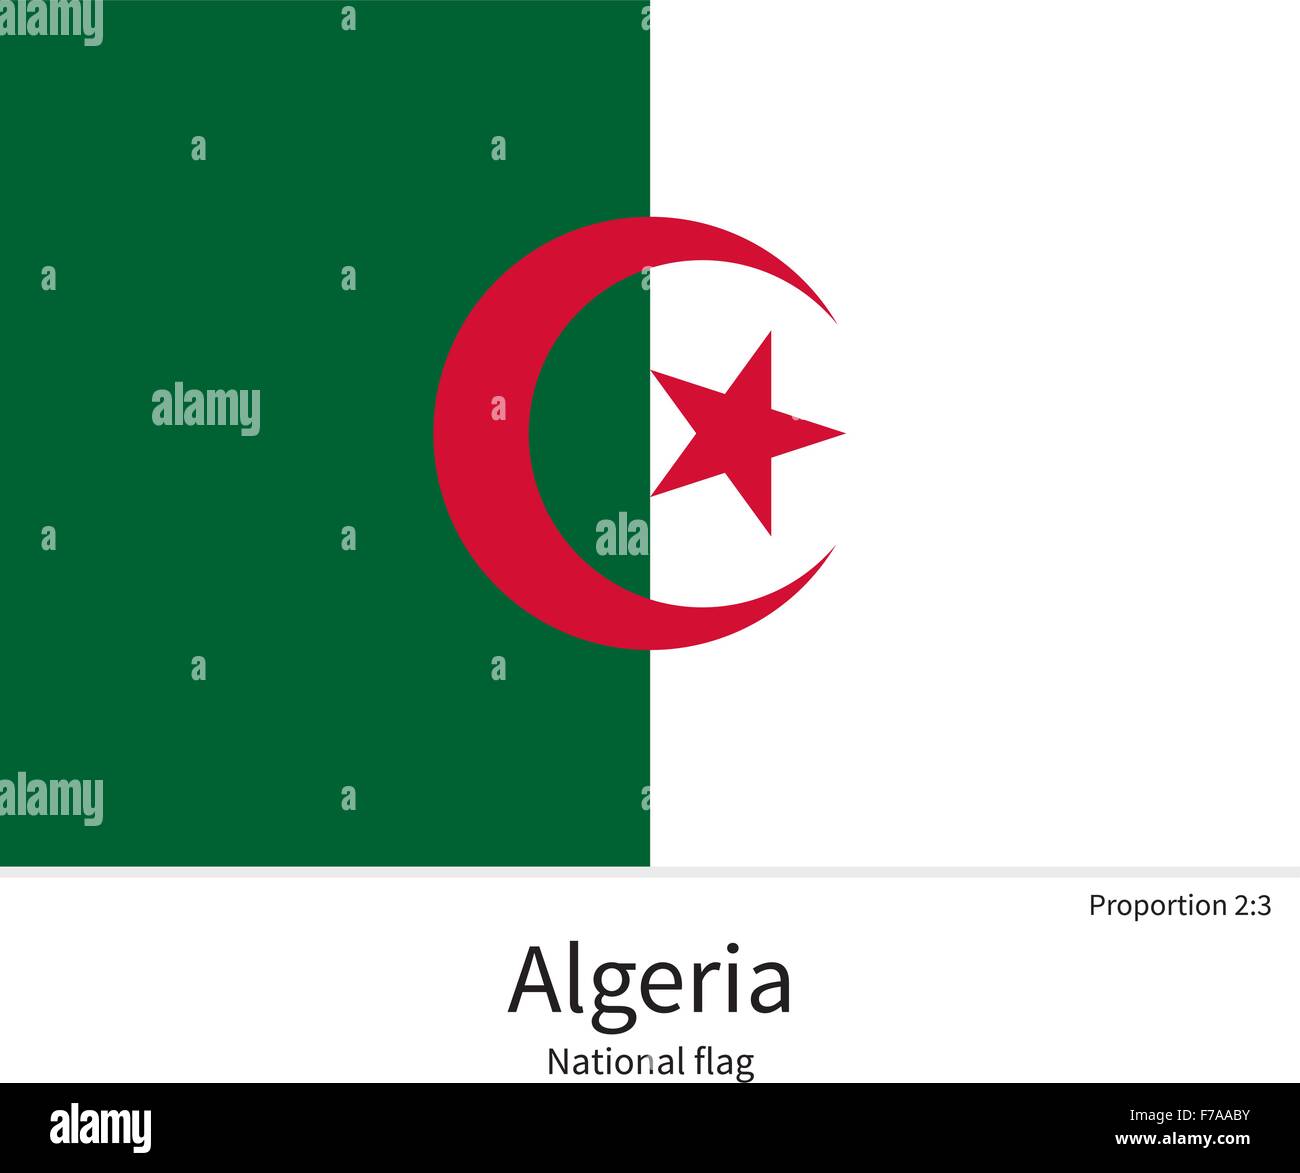 National flag of Algeria with correct proportions, element, colors Stock Vector